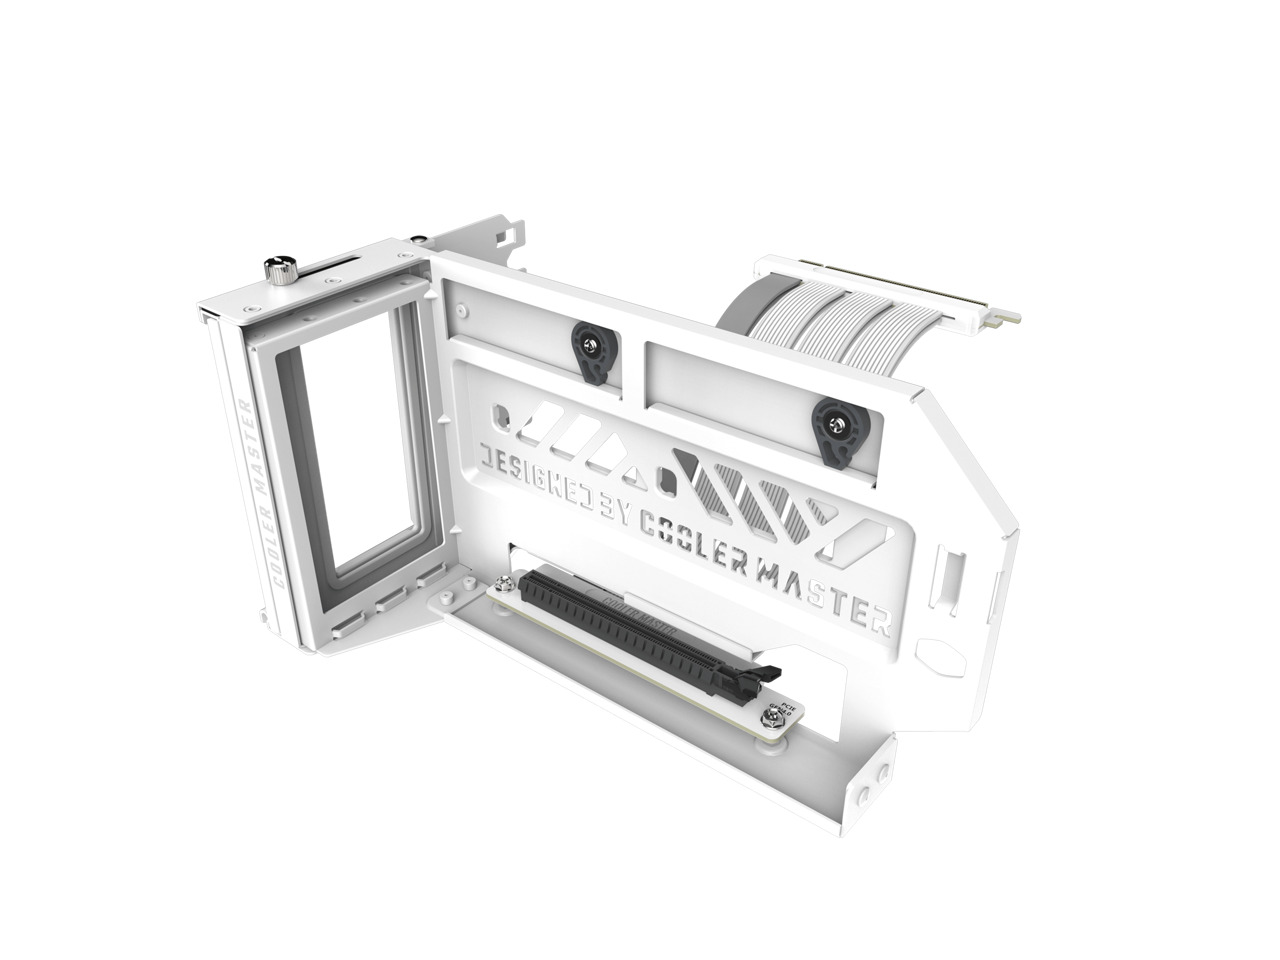 Cooler Master MasterAccessory Vertical Graphics Card Holder Kit V3 White with